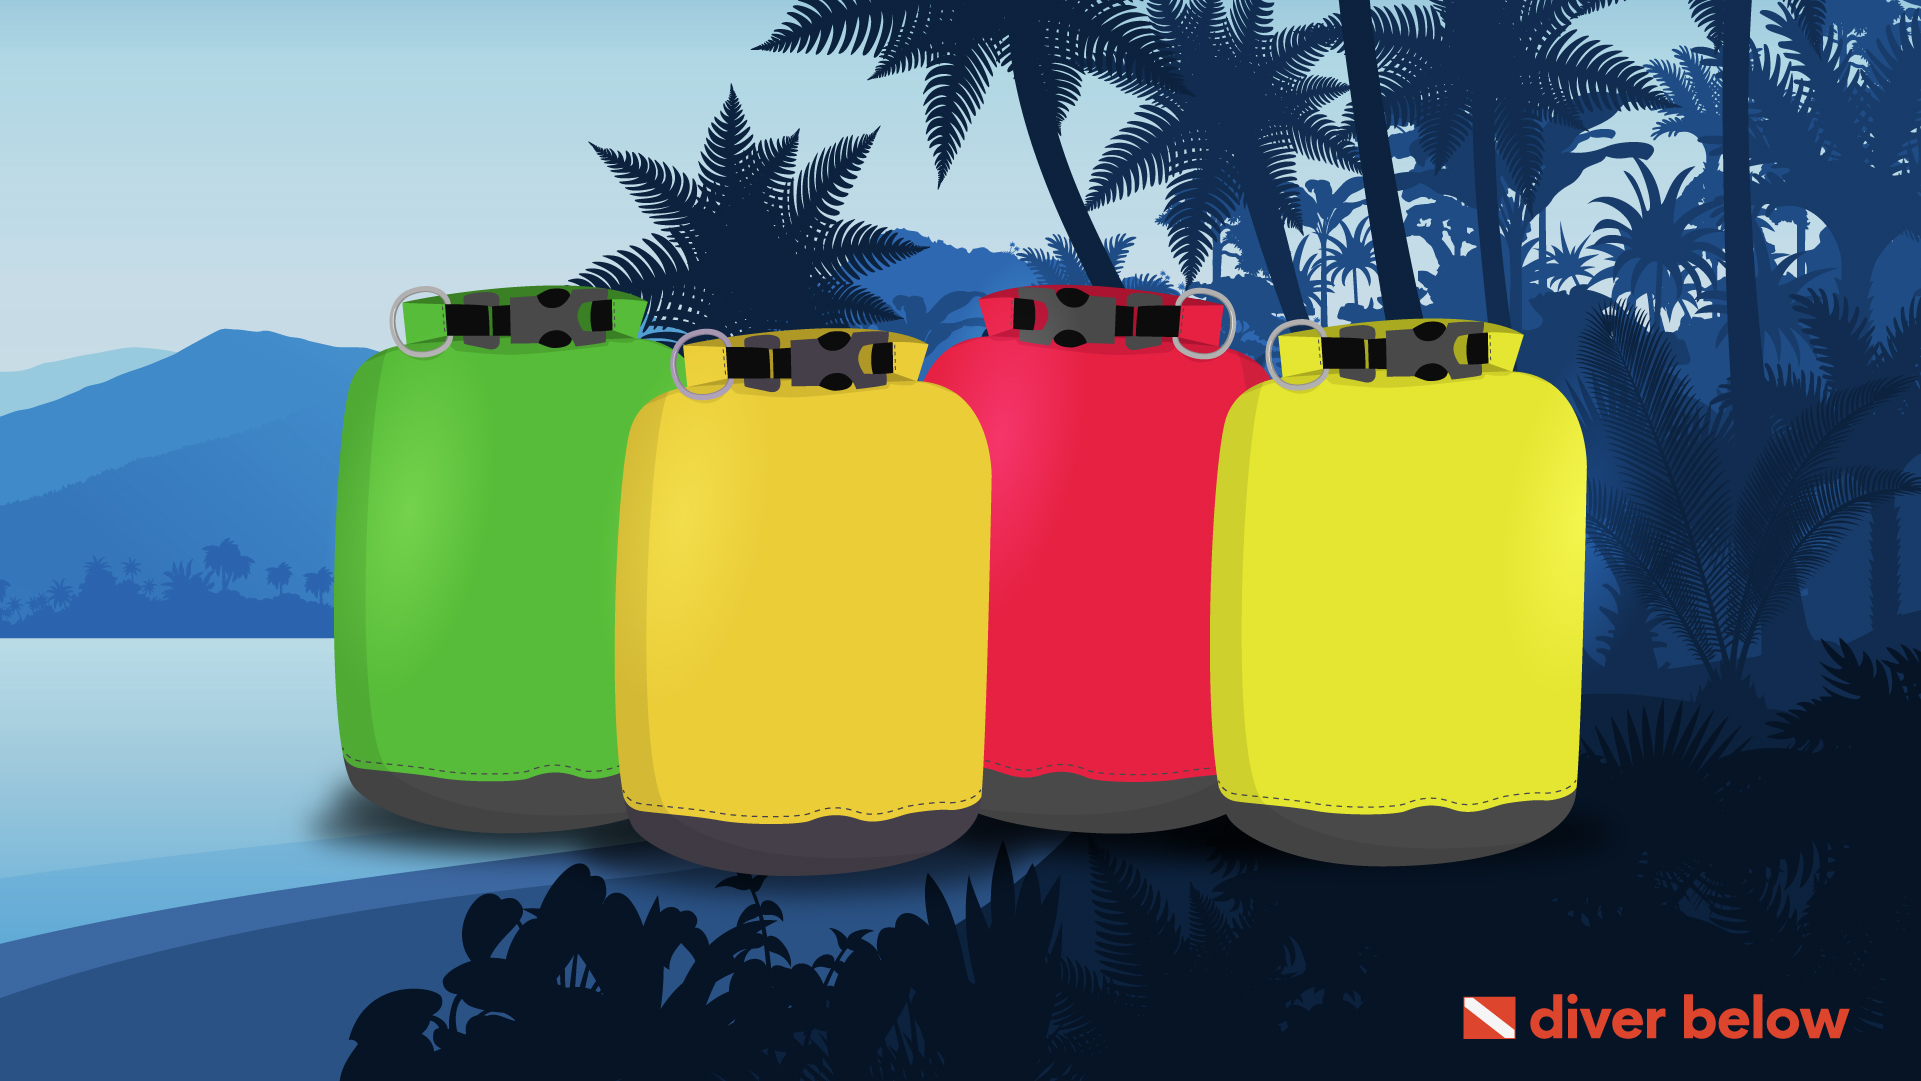 vector graphic showing 4 of the best dry bags lined up side by side on a beach